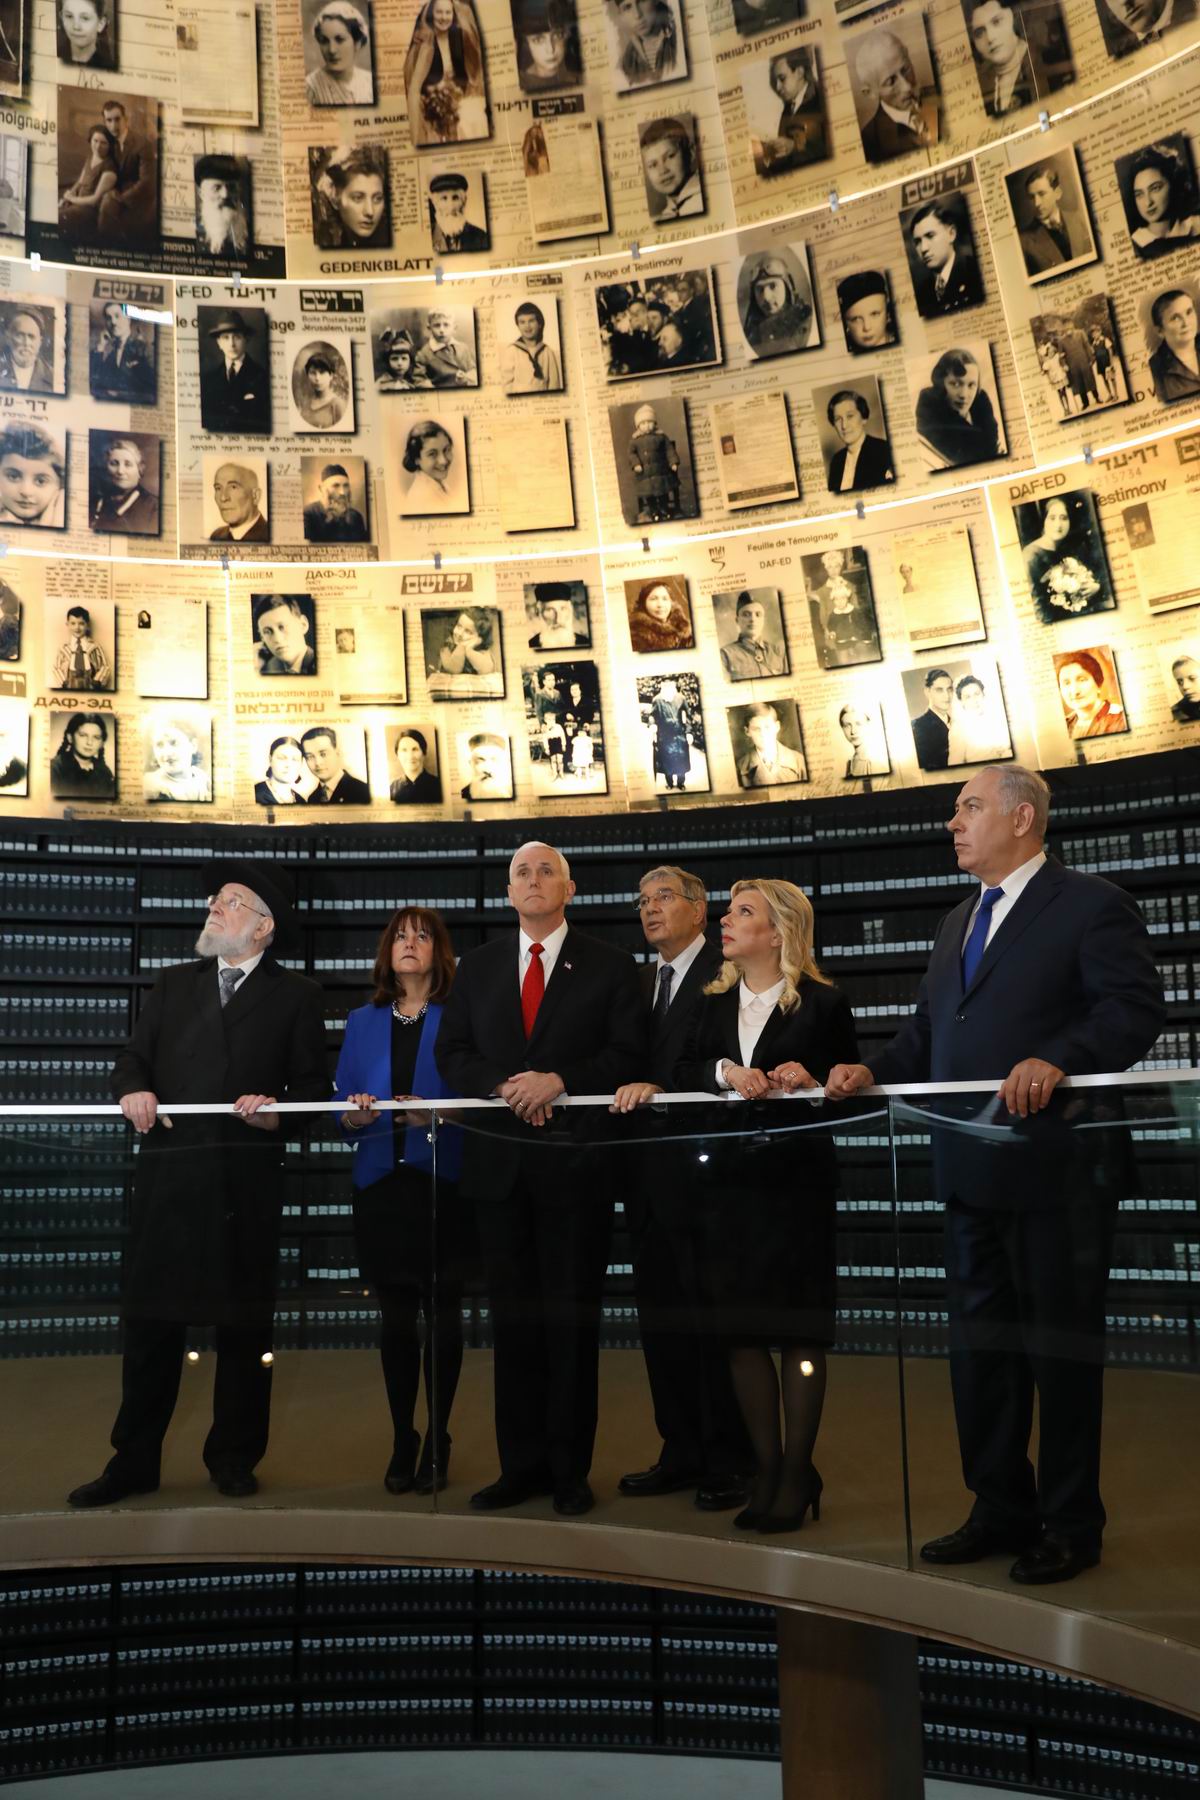 In the Hall of Names – a "symbolic tombstone" to the six million Jewish men, women and children murdered during the Holocaust